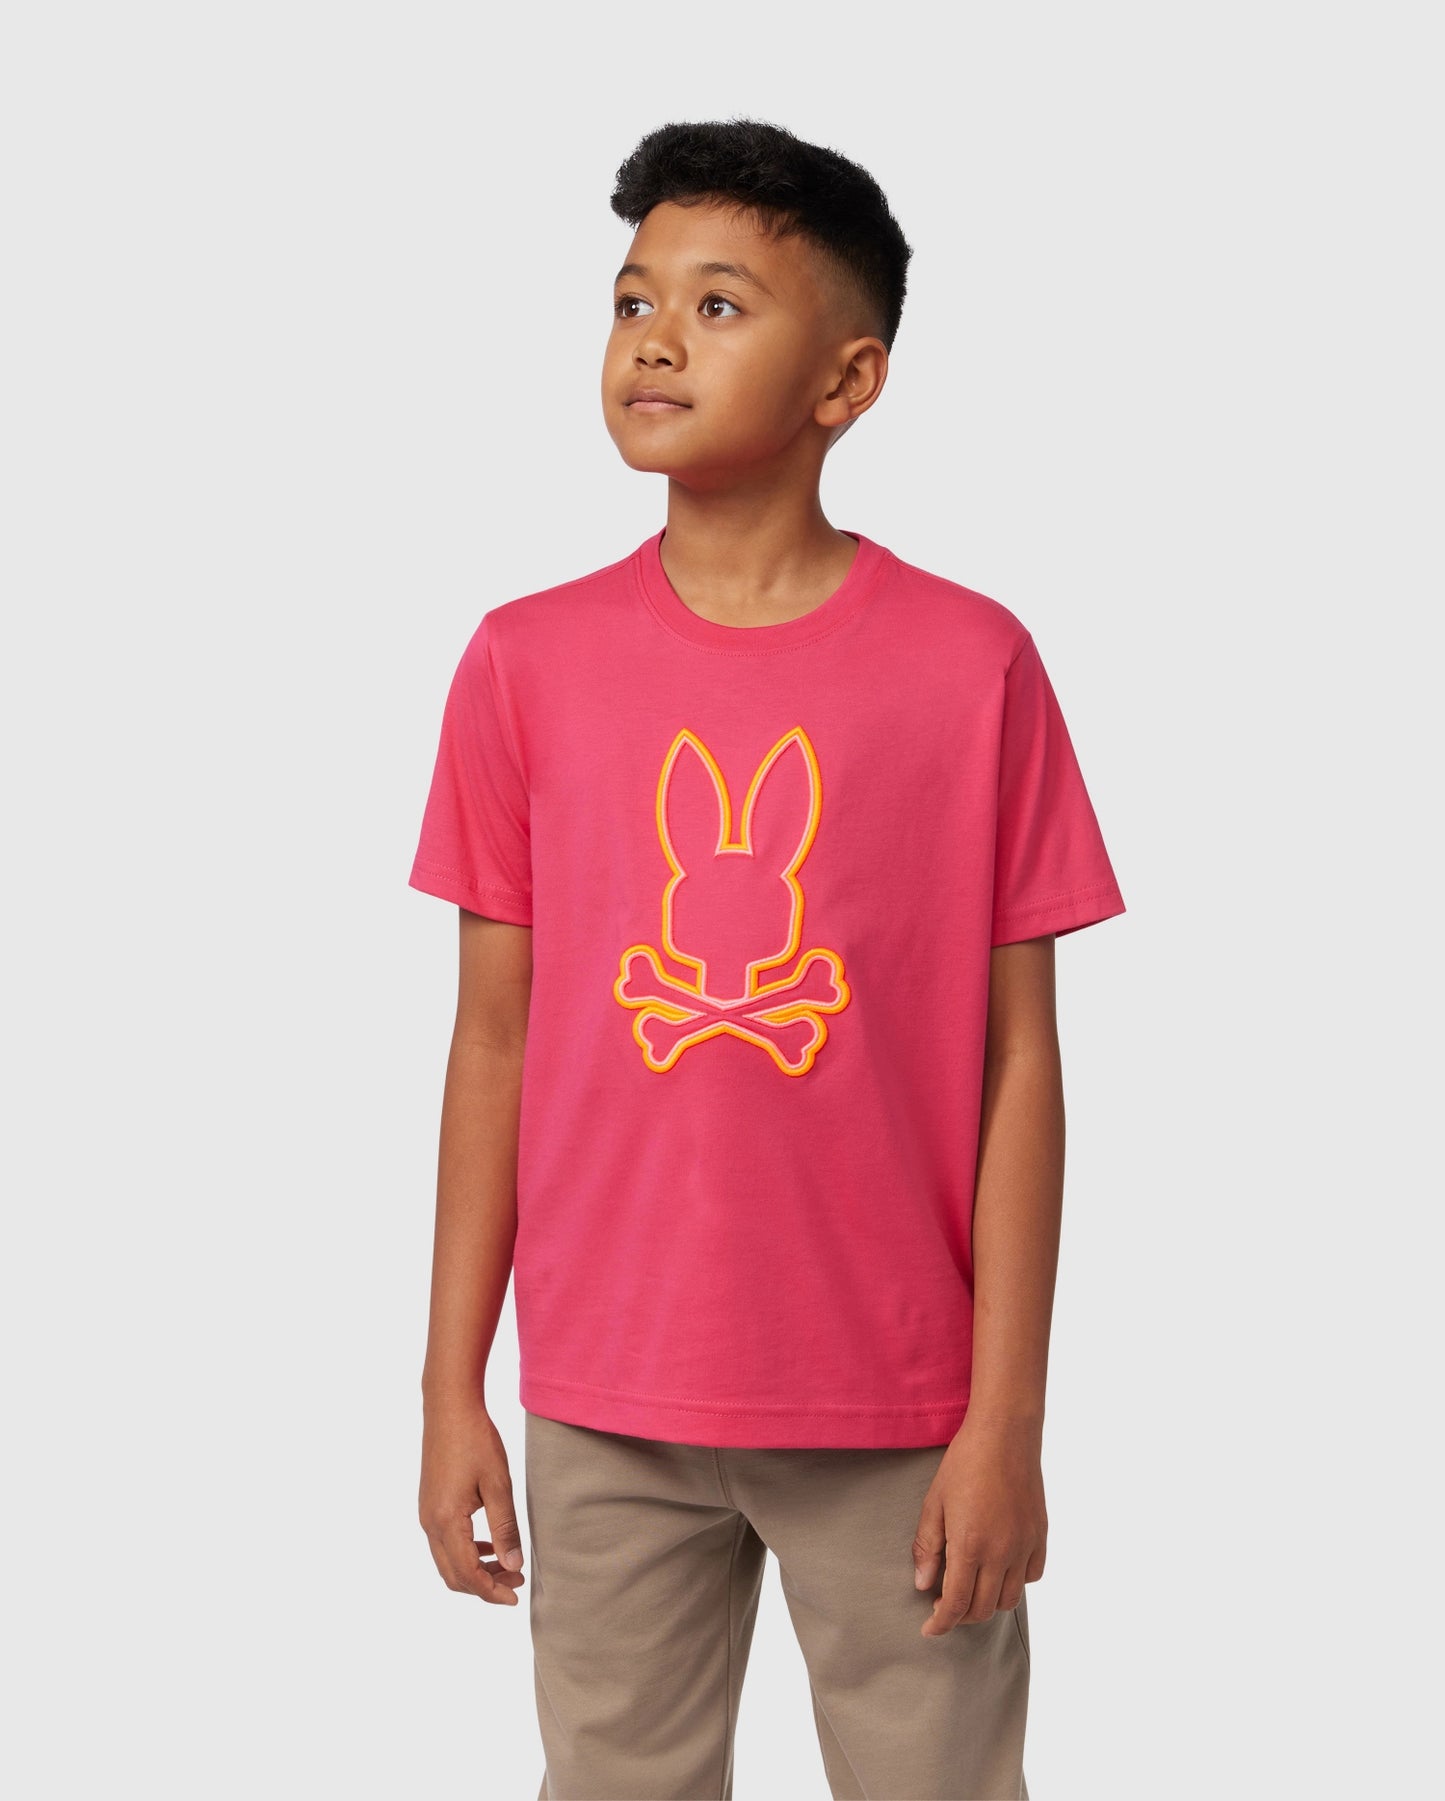 KIDS PINK SANTA MONICA EMBROIDERED GRAPHIC TEE | PSYCHO BUNNY